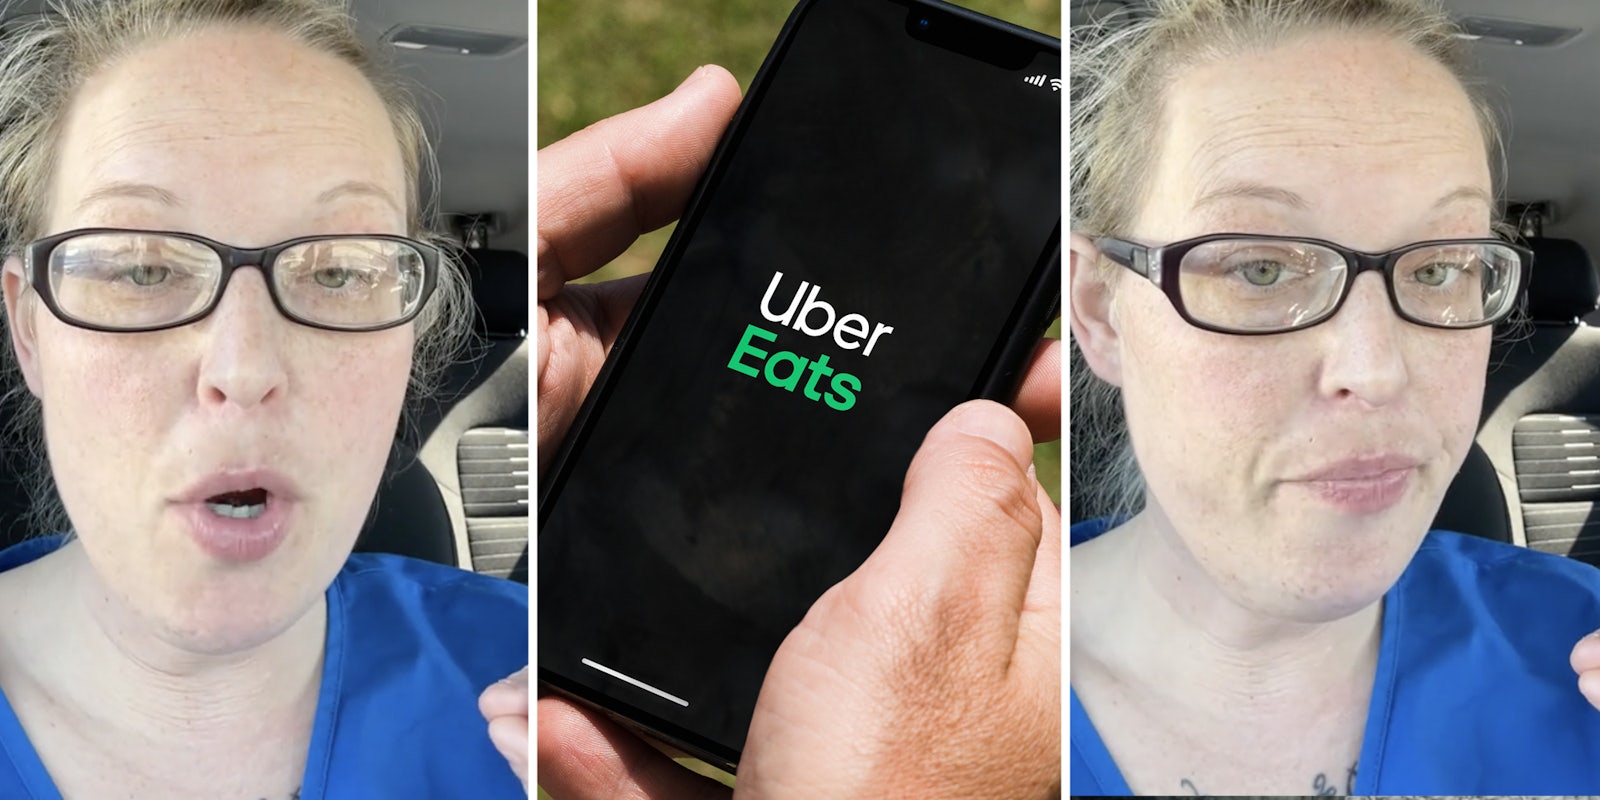 Woman talking(l+r), Hands holding phone with uber eats app open